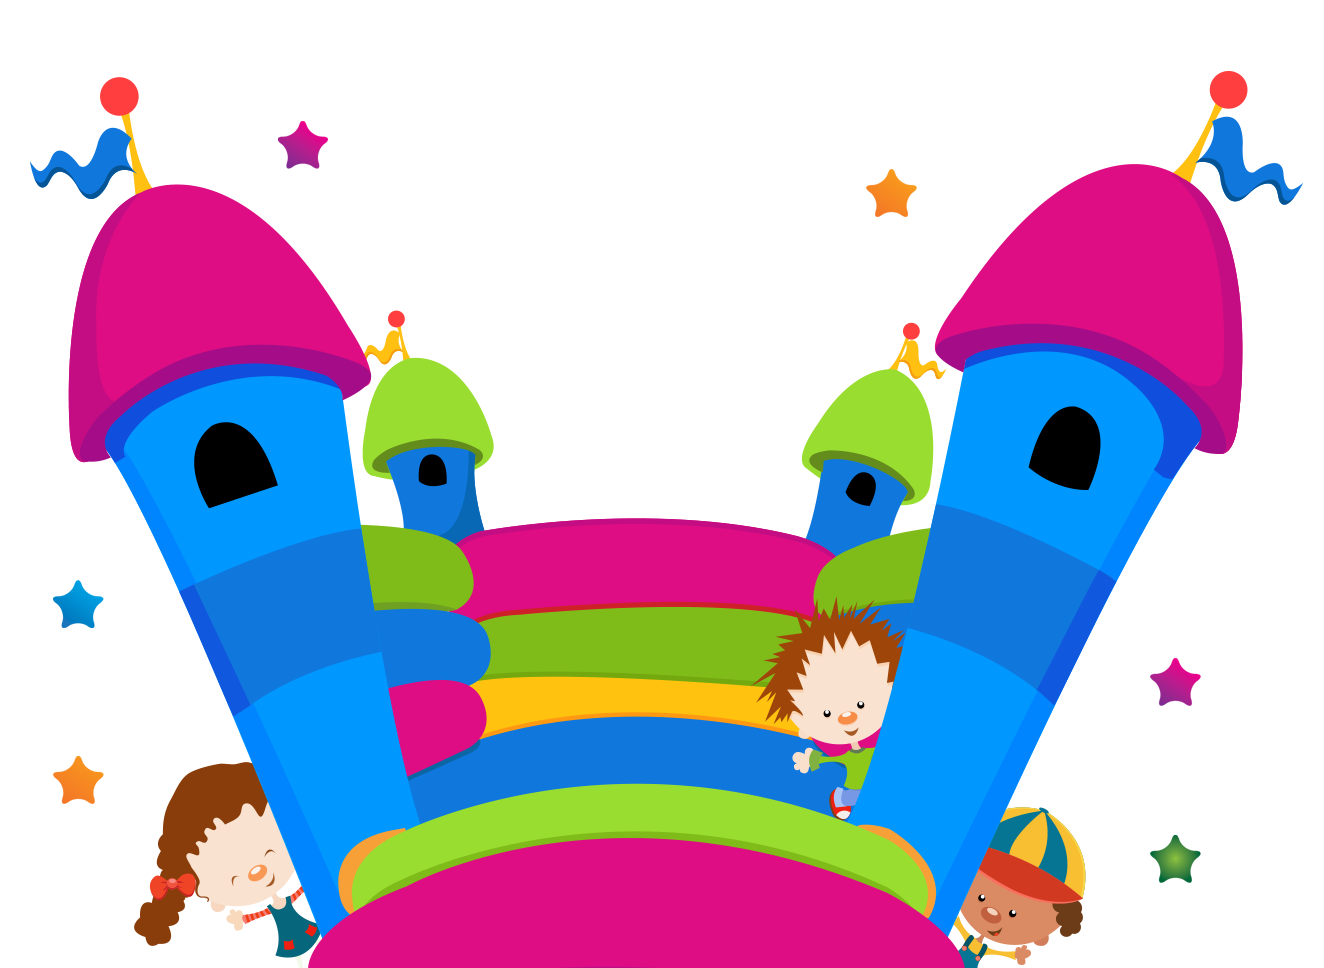 Jumping clipart jumping girl. Bounce me happy castles